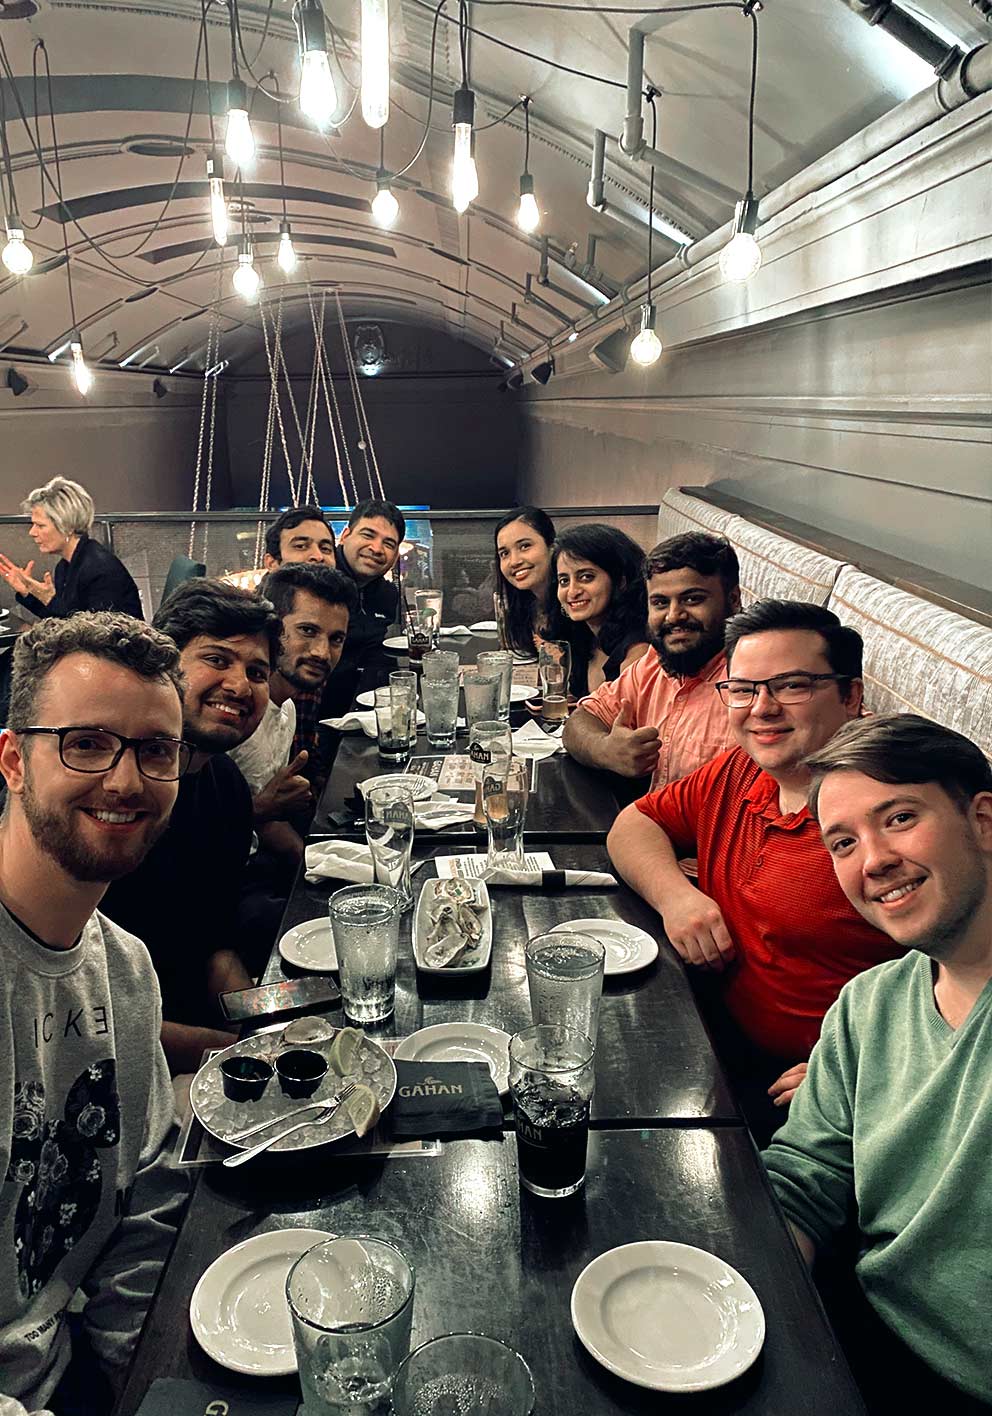 A group of Tarkans sitting down at a long black dinner table with empty plates in front of them, looking into the camera and smiling